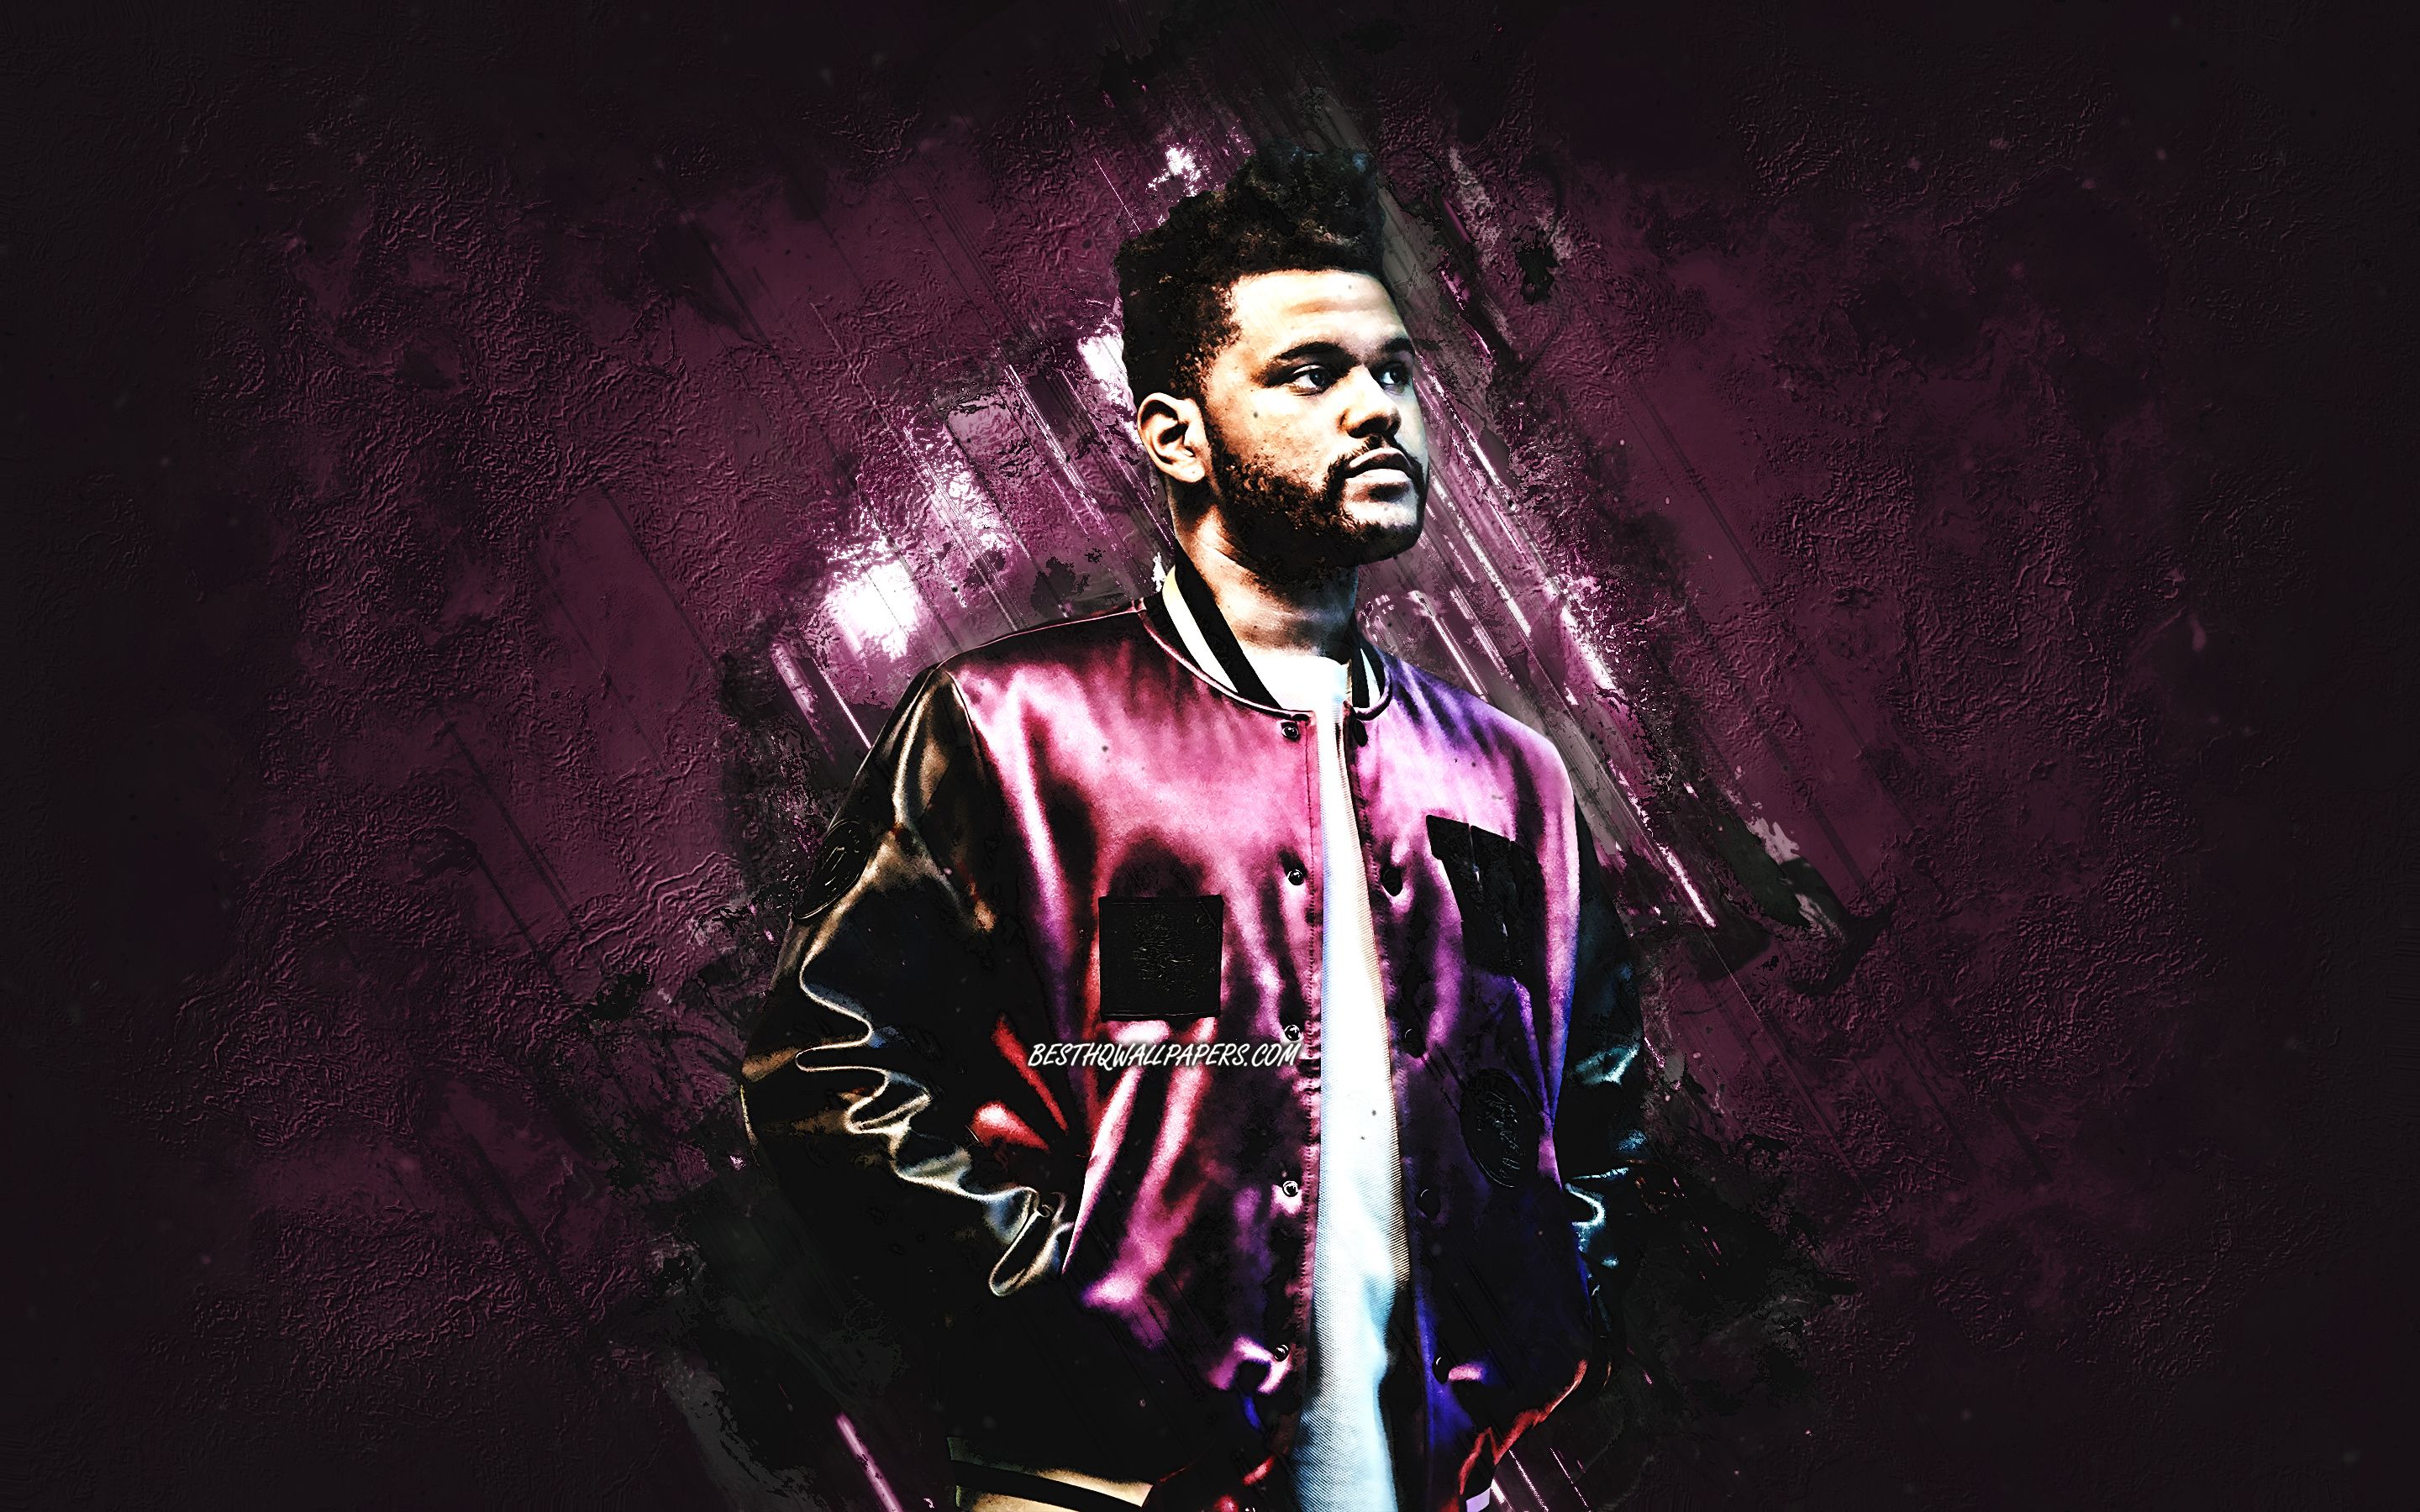 Download wallpaper The Weeknd, portrait, canadian singer, purple stone background, creative art, drawing, popular singers, Abel Makkonen Tesfaye for desktop with resolution 2880x1800. High Quality HD picture wallpaper